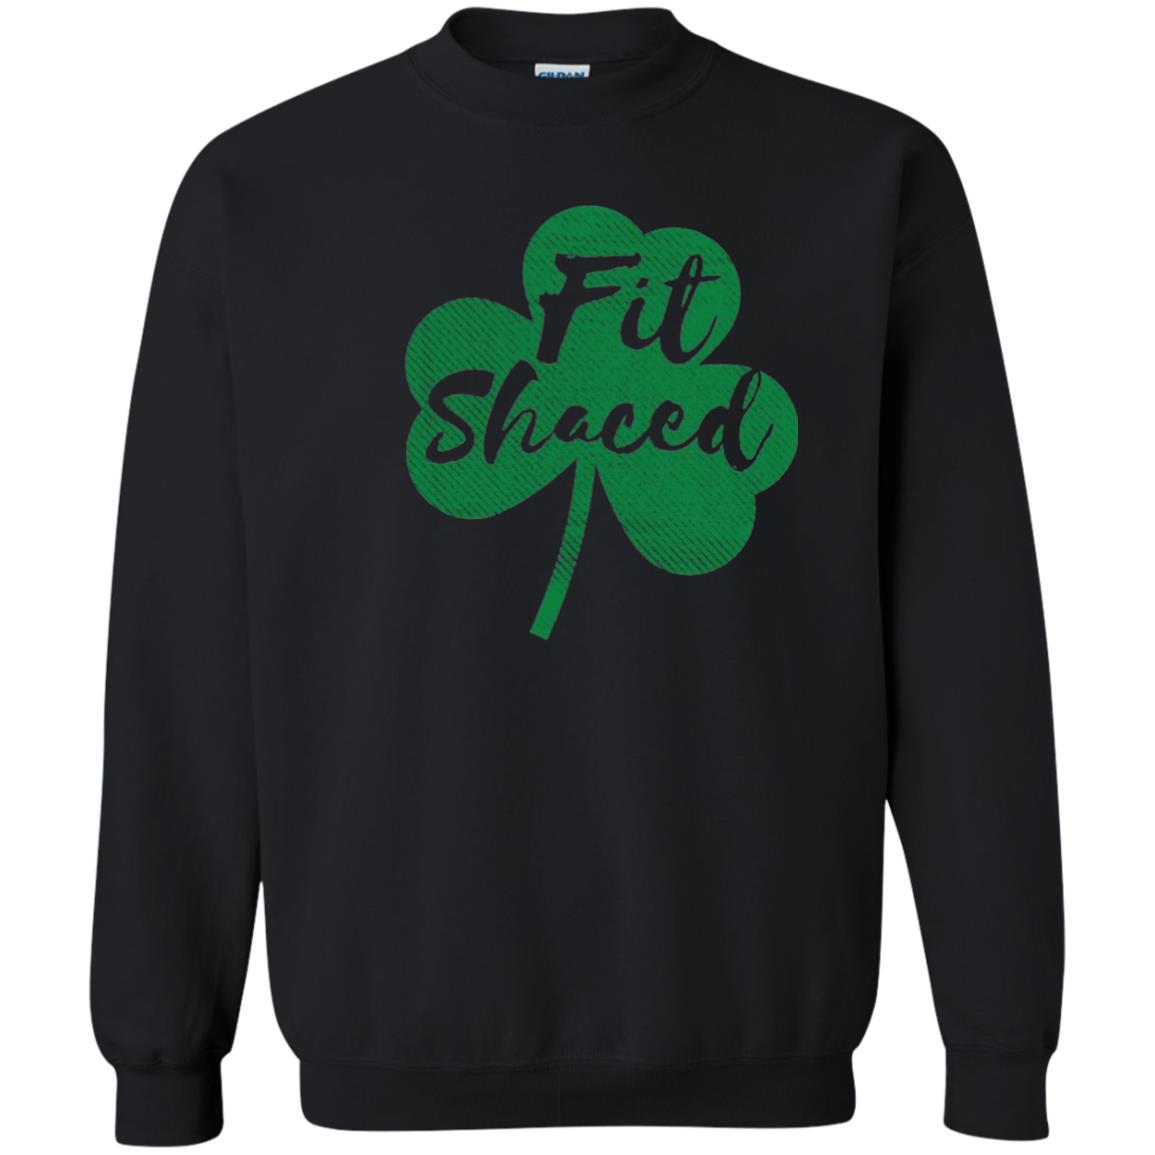 St Patricks Day T-shirt Drinking Fit Shaced